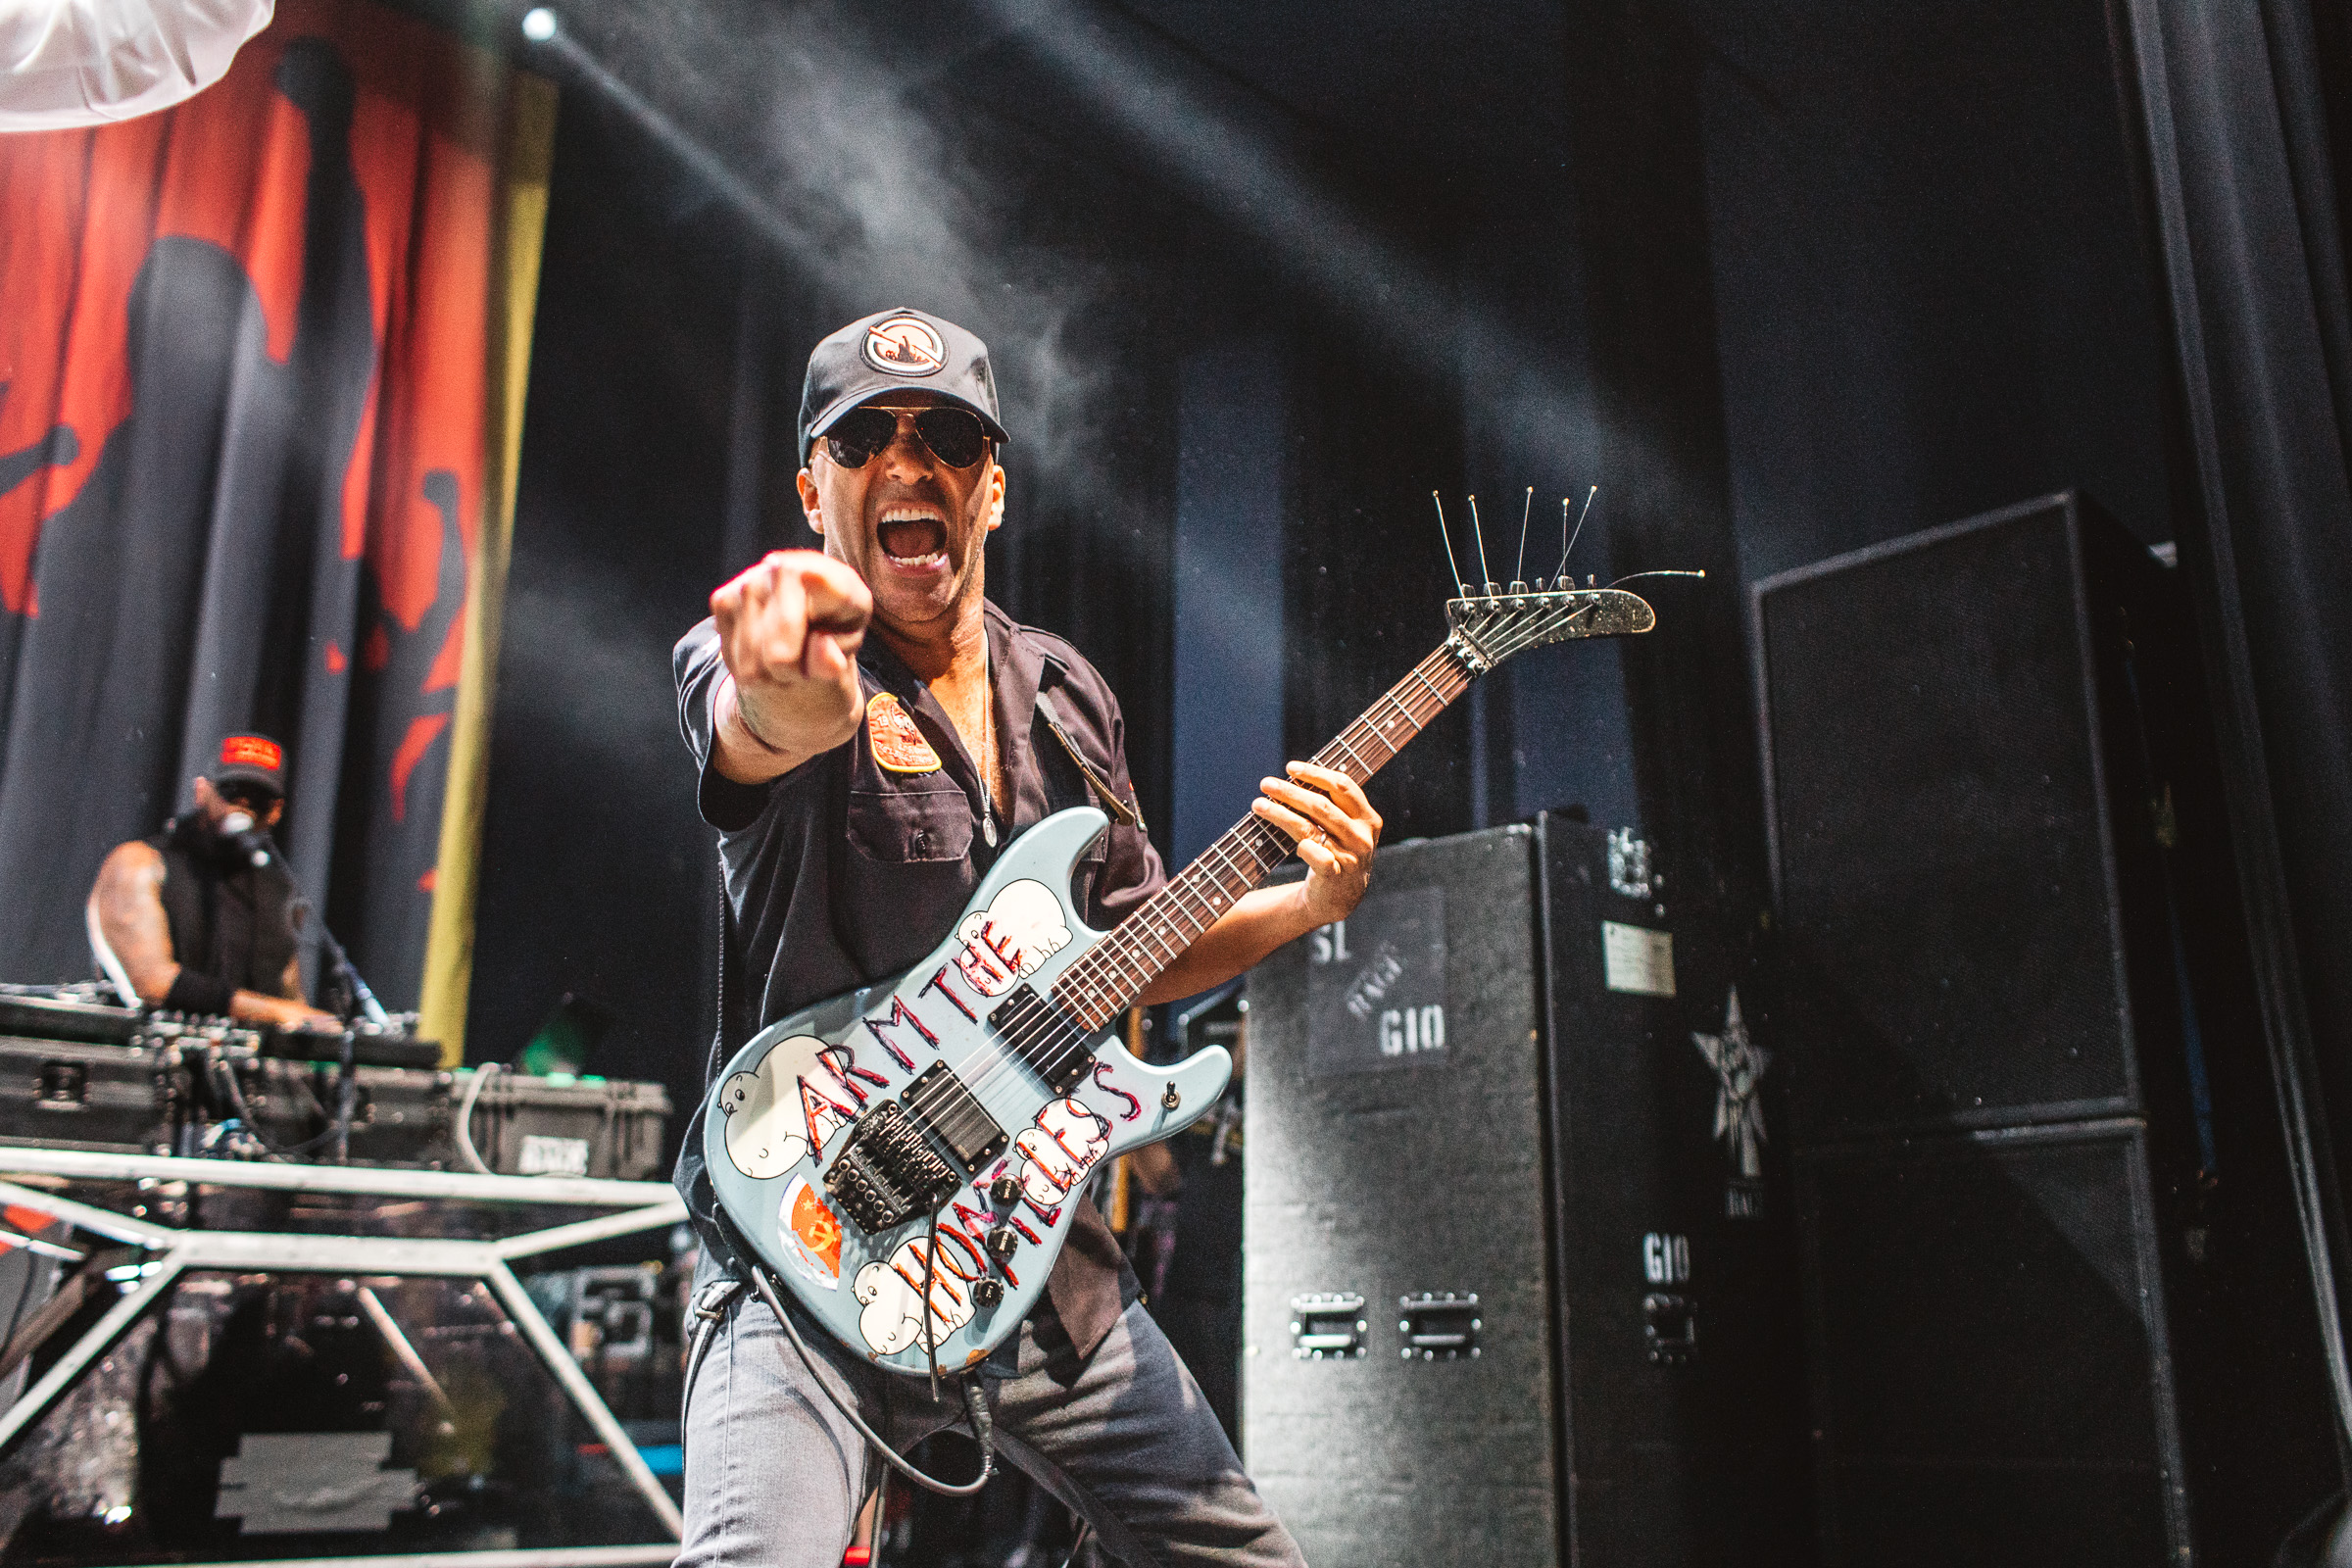 Tom Morello playing the Arm the Homeless guitar with Prophets of Rage, and pointing at the photographer